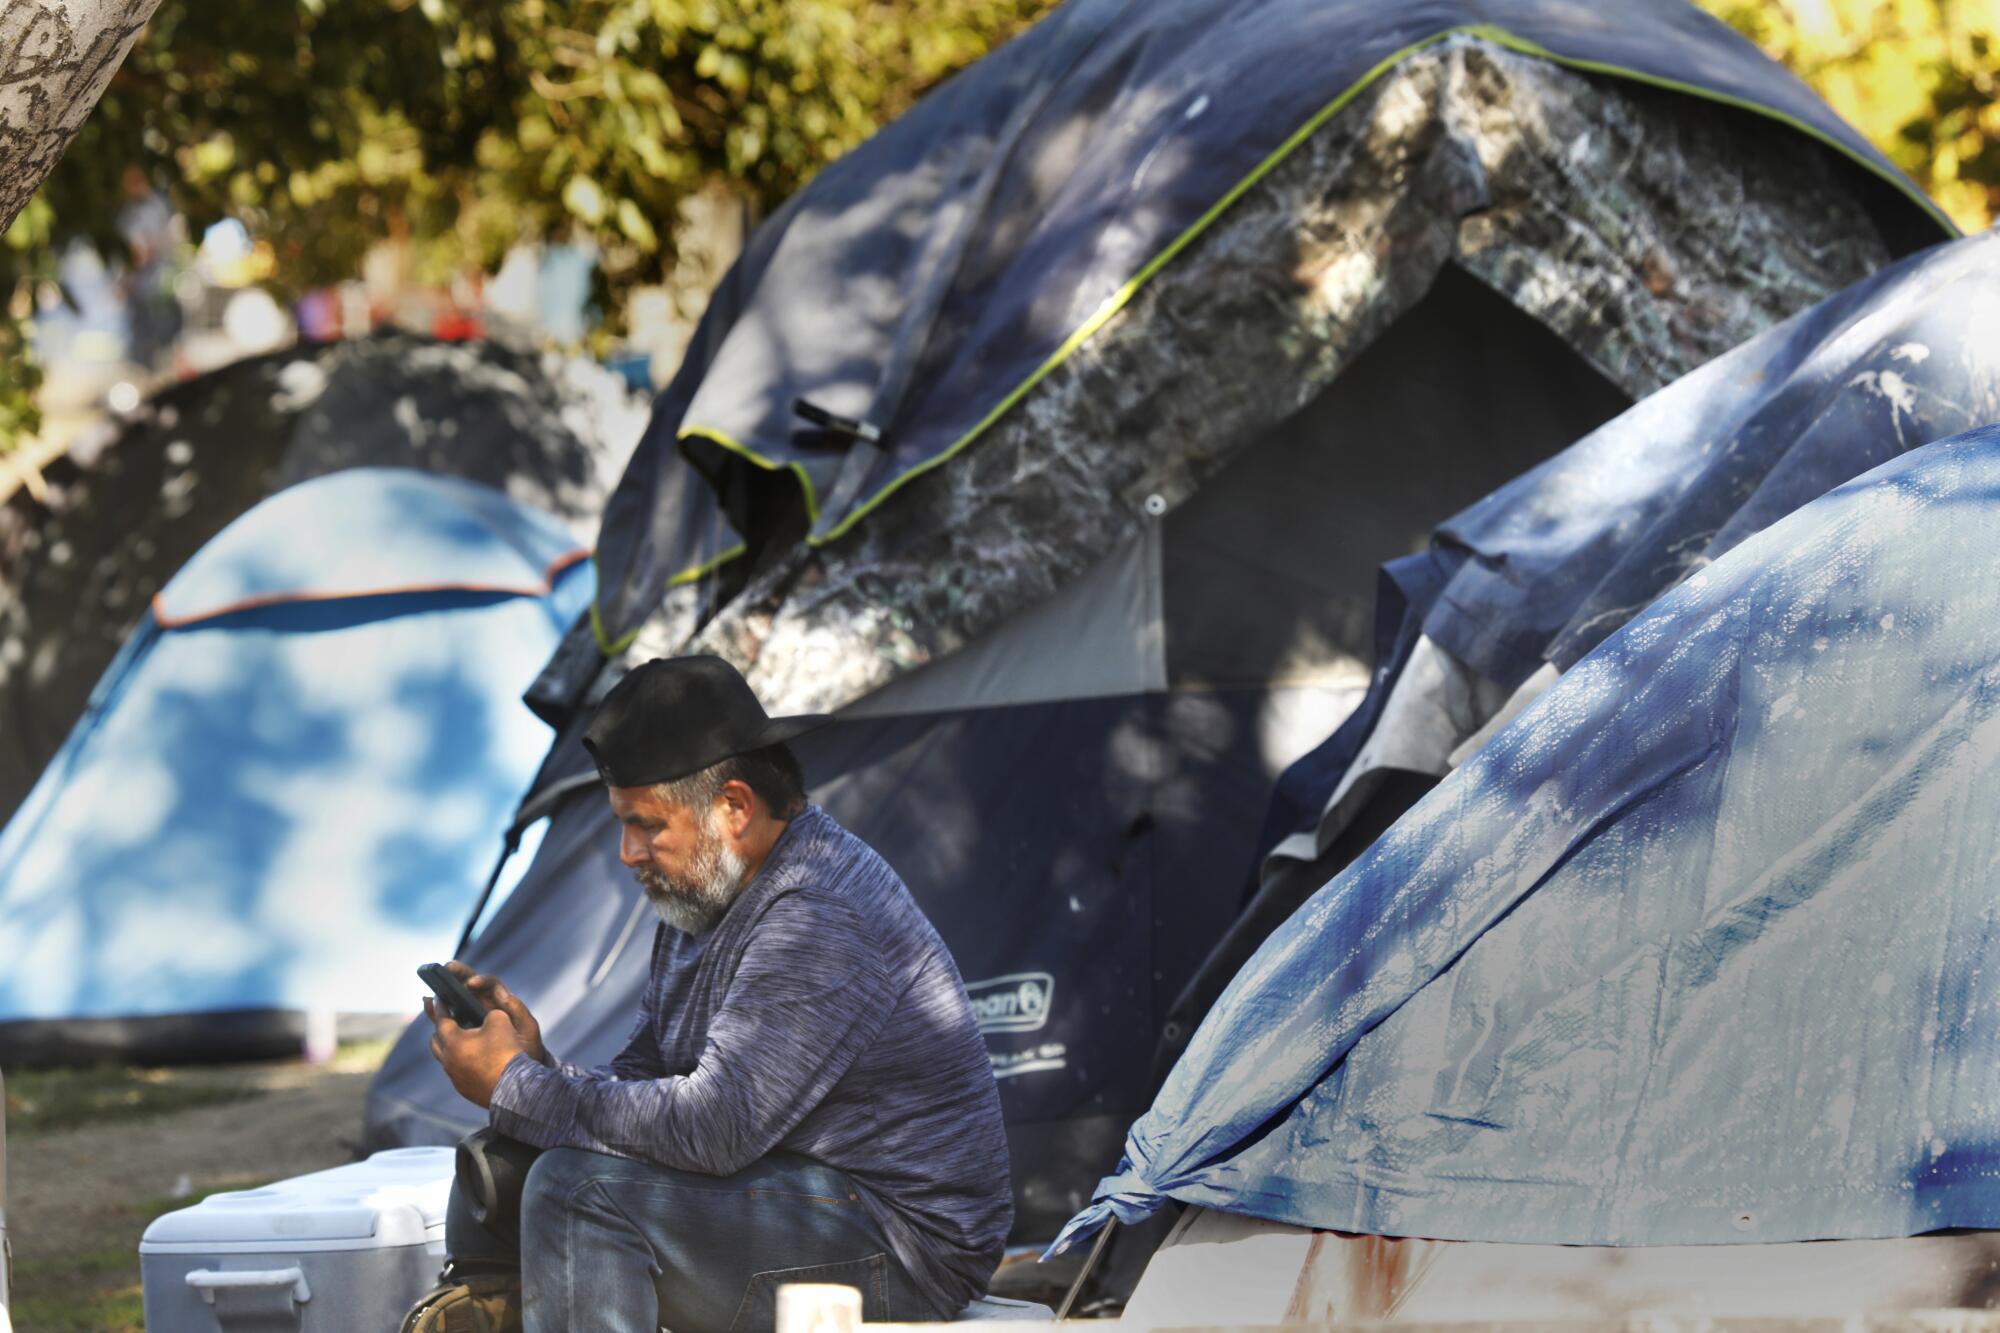 A man rests outside a tent at MacArthur Park